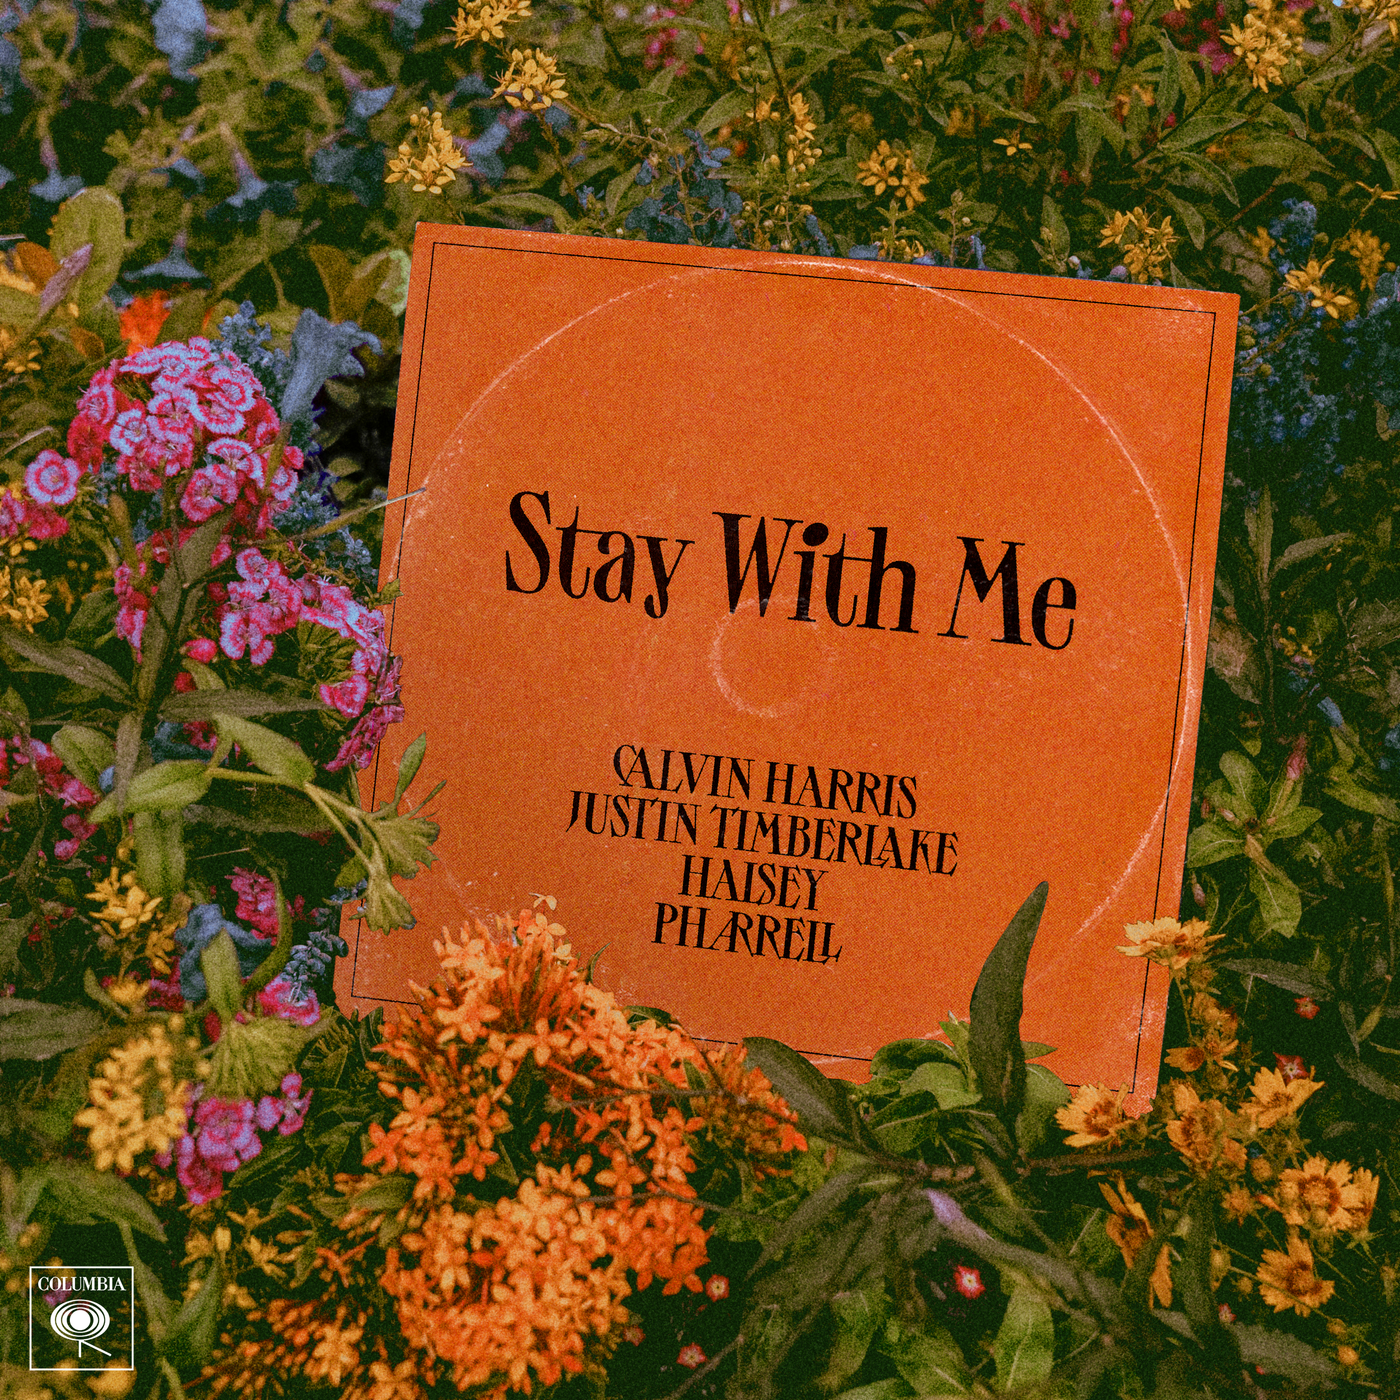 Stay With Me ／Calvin Harris